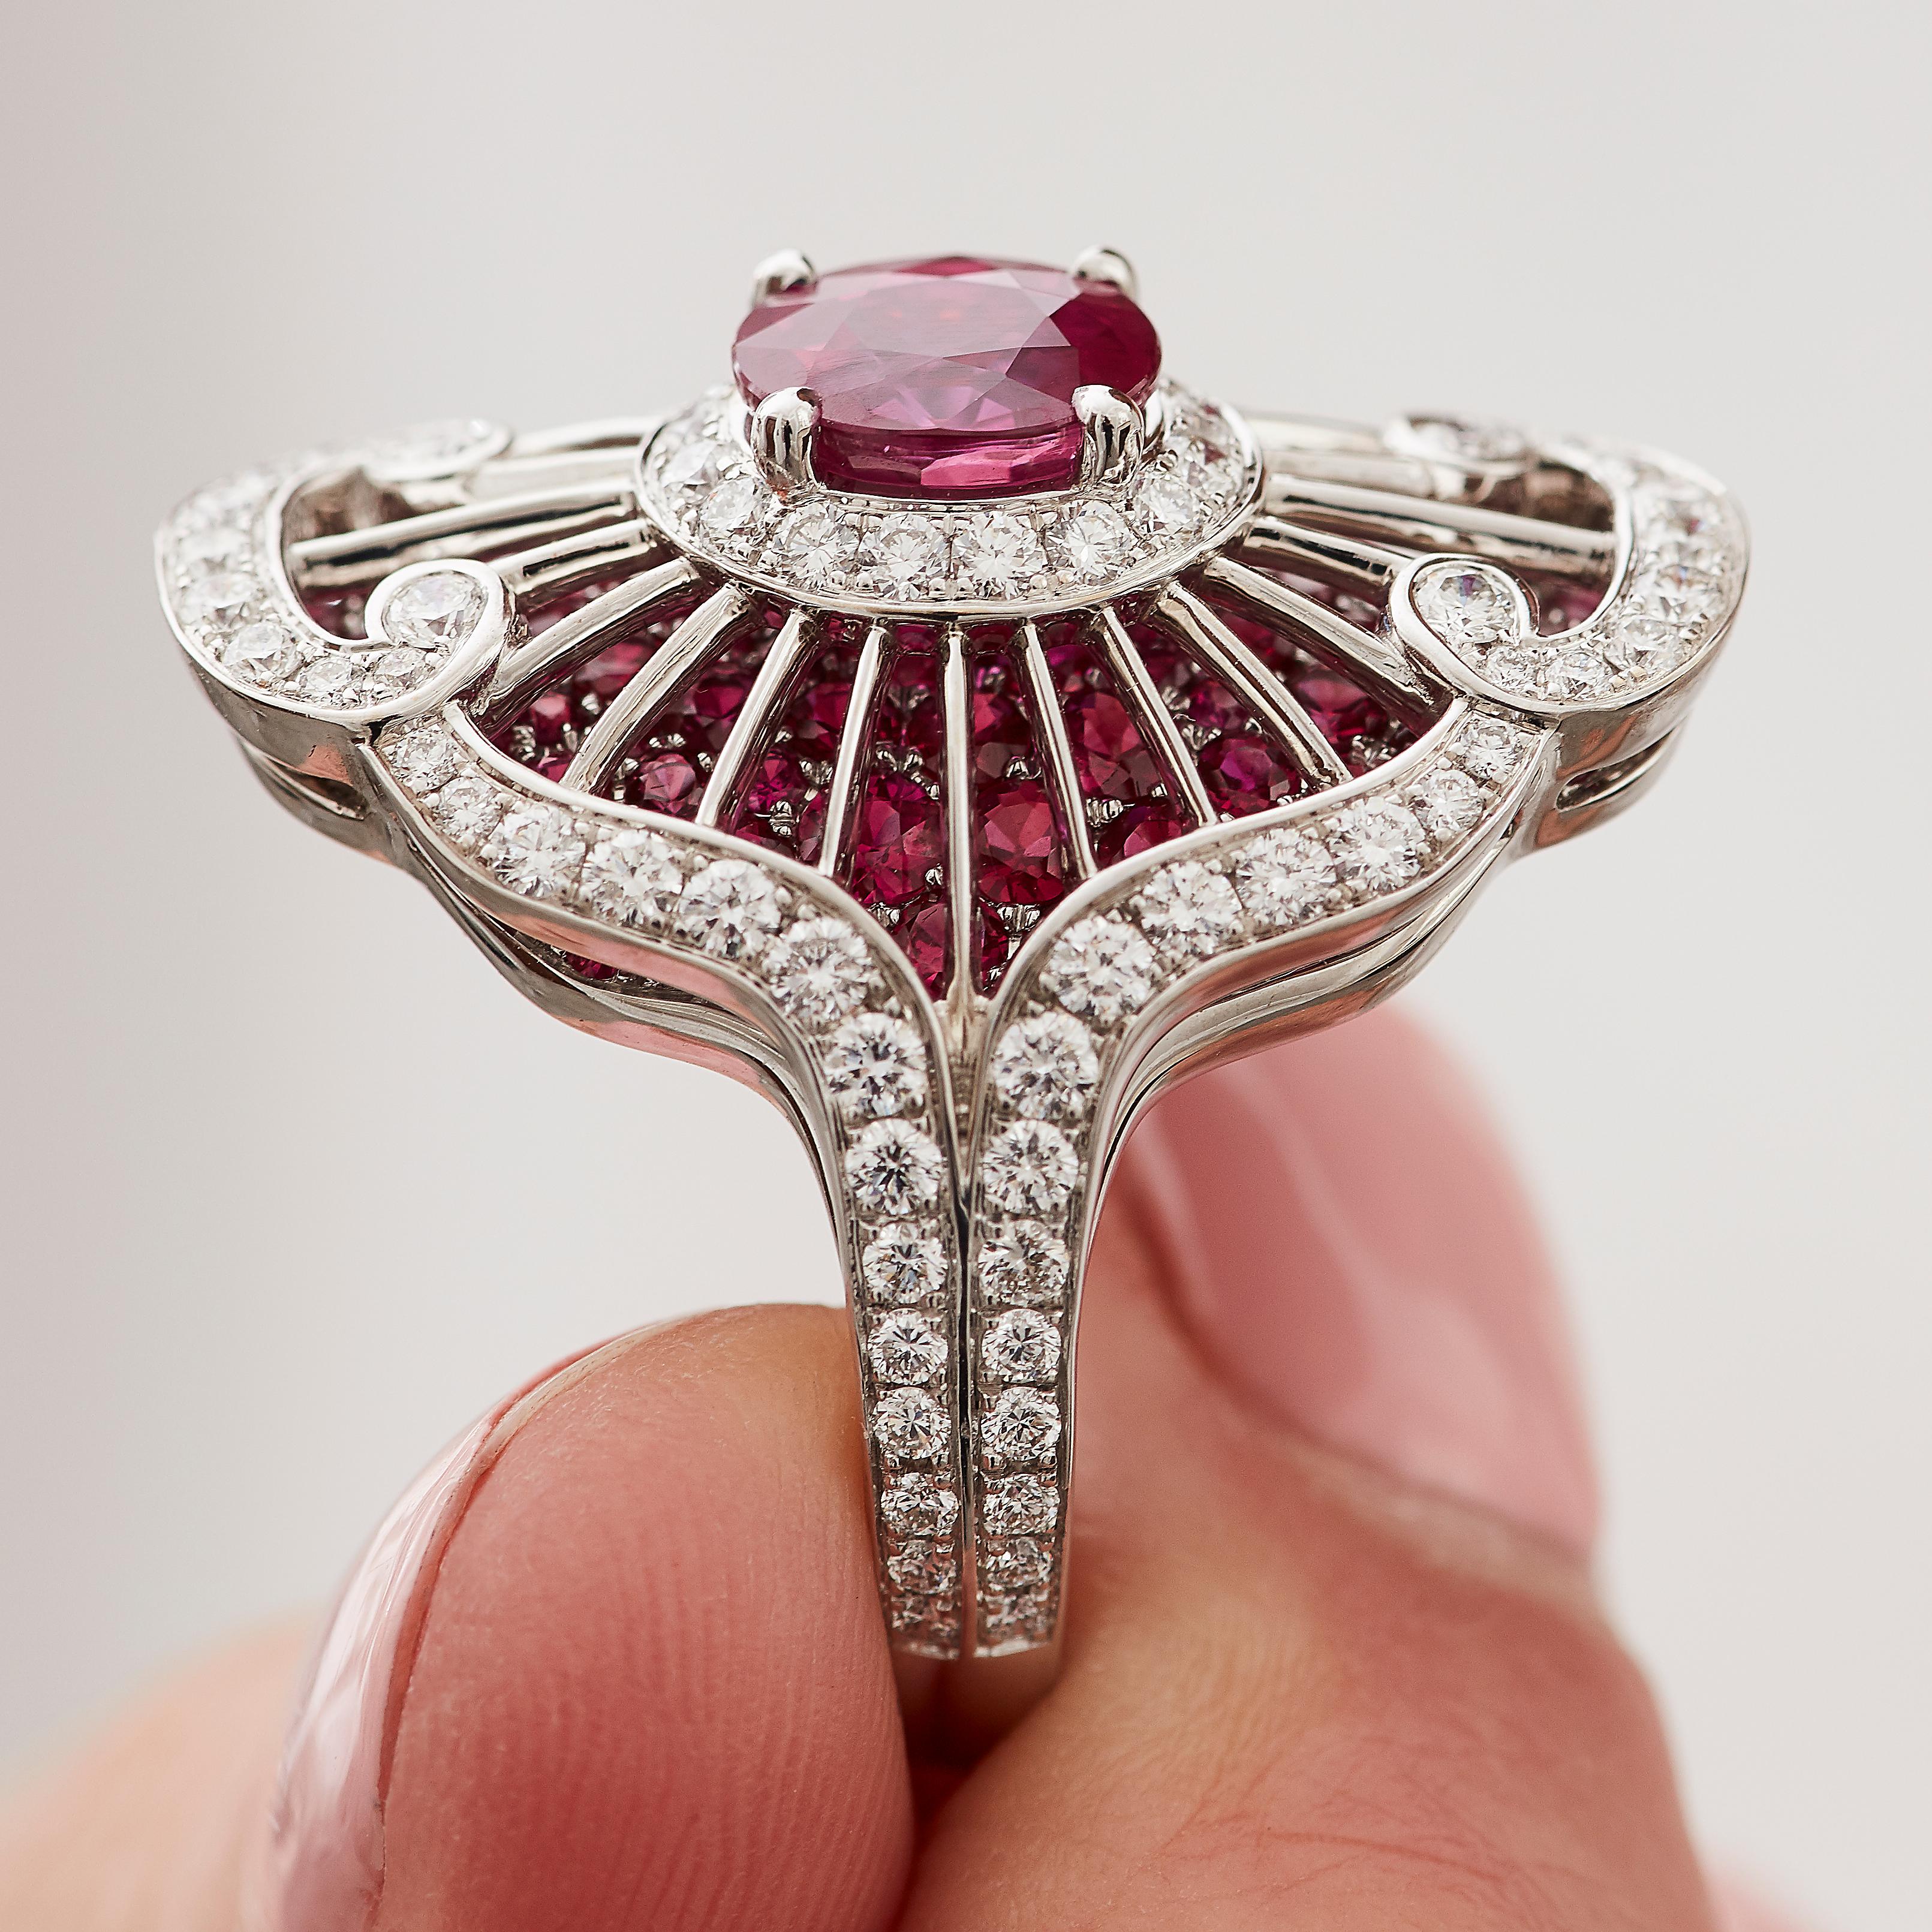 A House of Garrard 18 karat white gold 'Jewelled Vault' ring set with a central GIA certified oval ruby, with radiating knife-bars and round white diamonds set raised above a round ruby pavé base.

1 Oval ruby weighing: 1.70cts                      